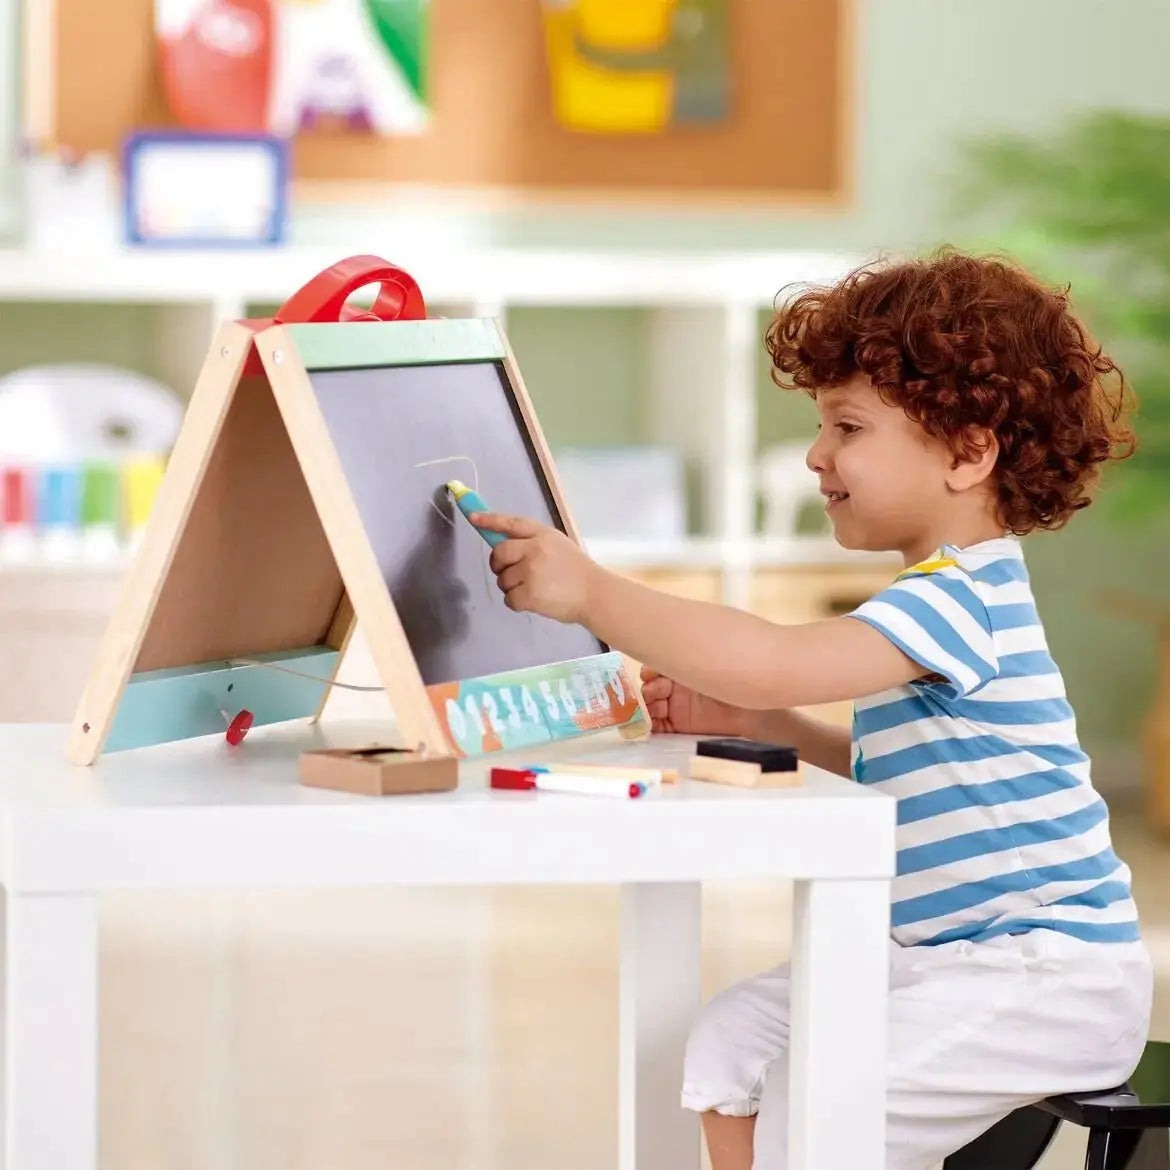 Top 9 Easel Crafts & Activities for Toddlers: Easel Crafts & Activities for  toddlers